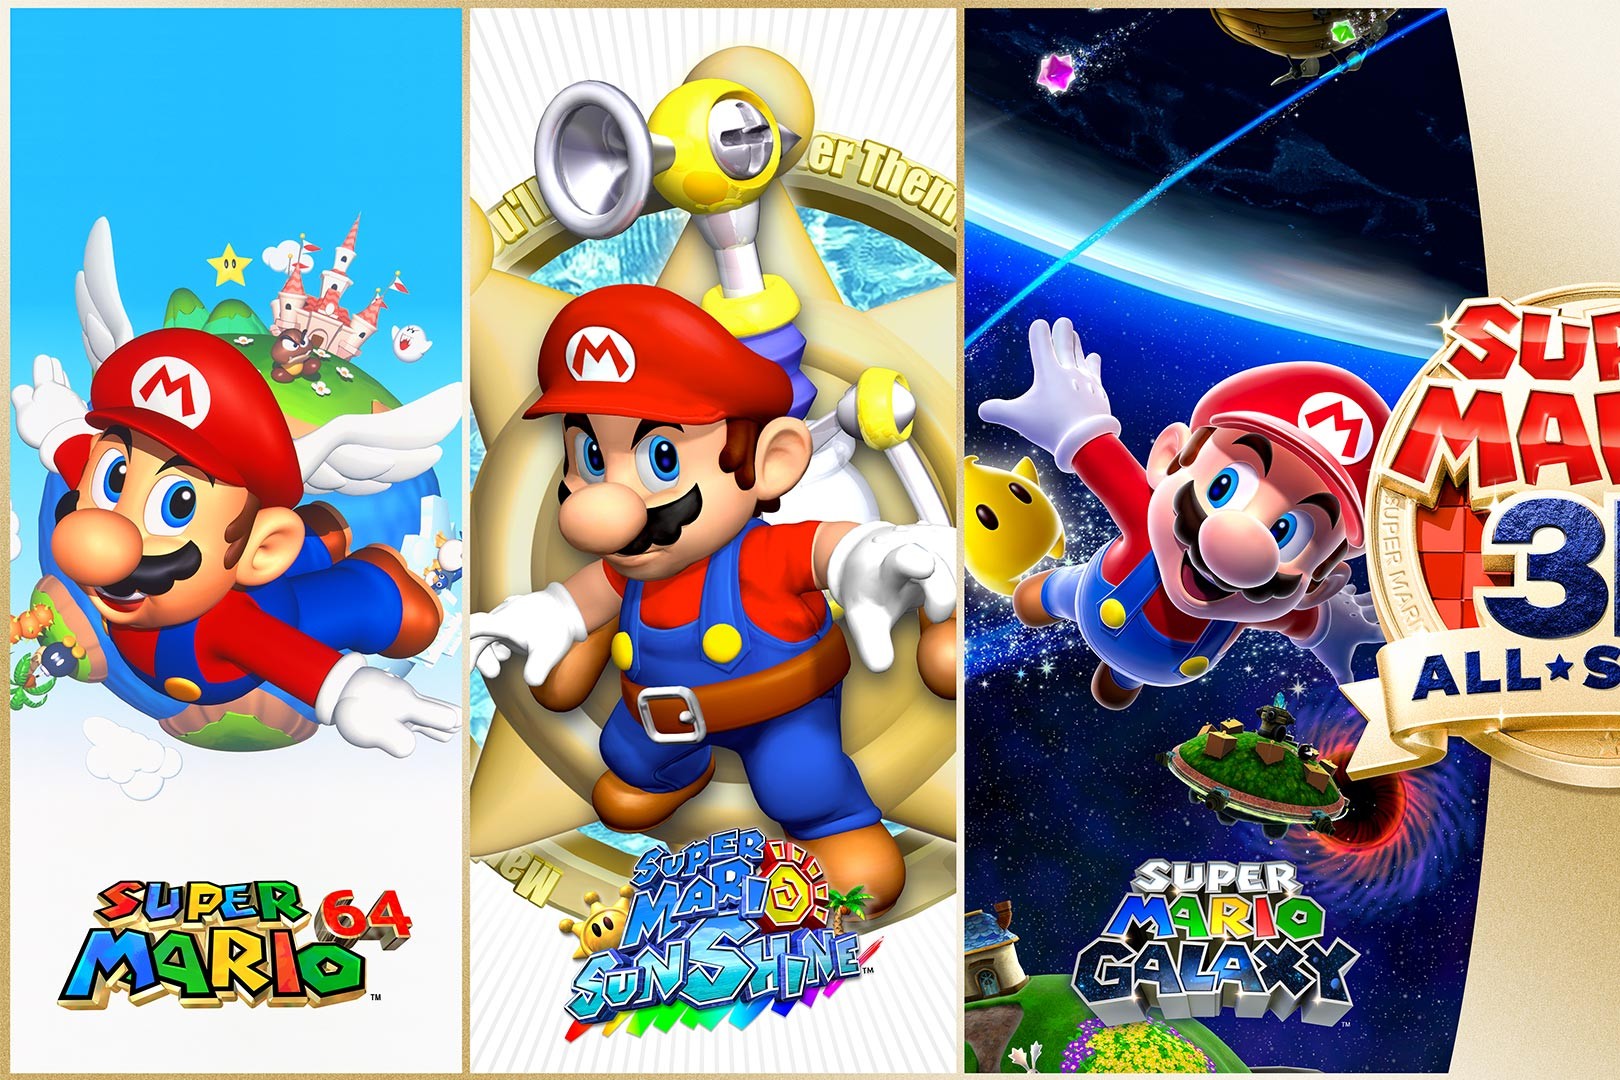 Super Mario 3D All-Stars leaves Nintendo eShop on March 31st - News -  Nintendo Official Site